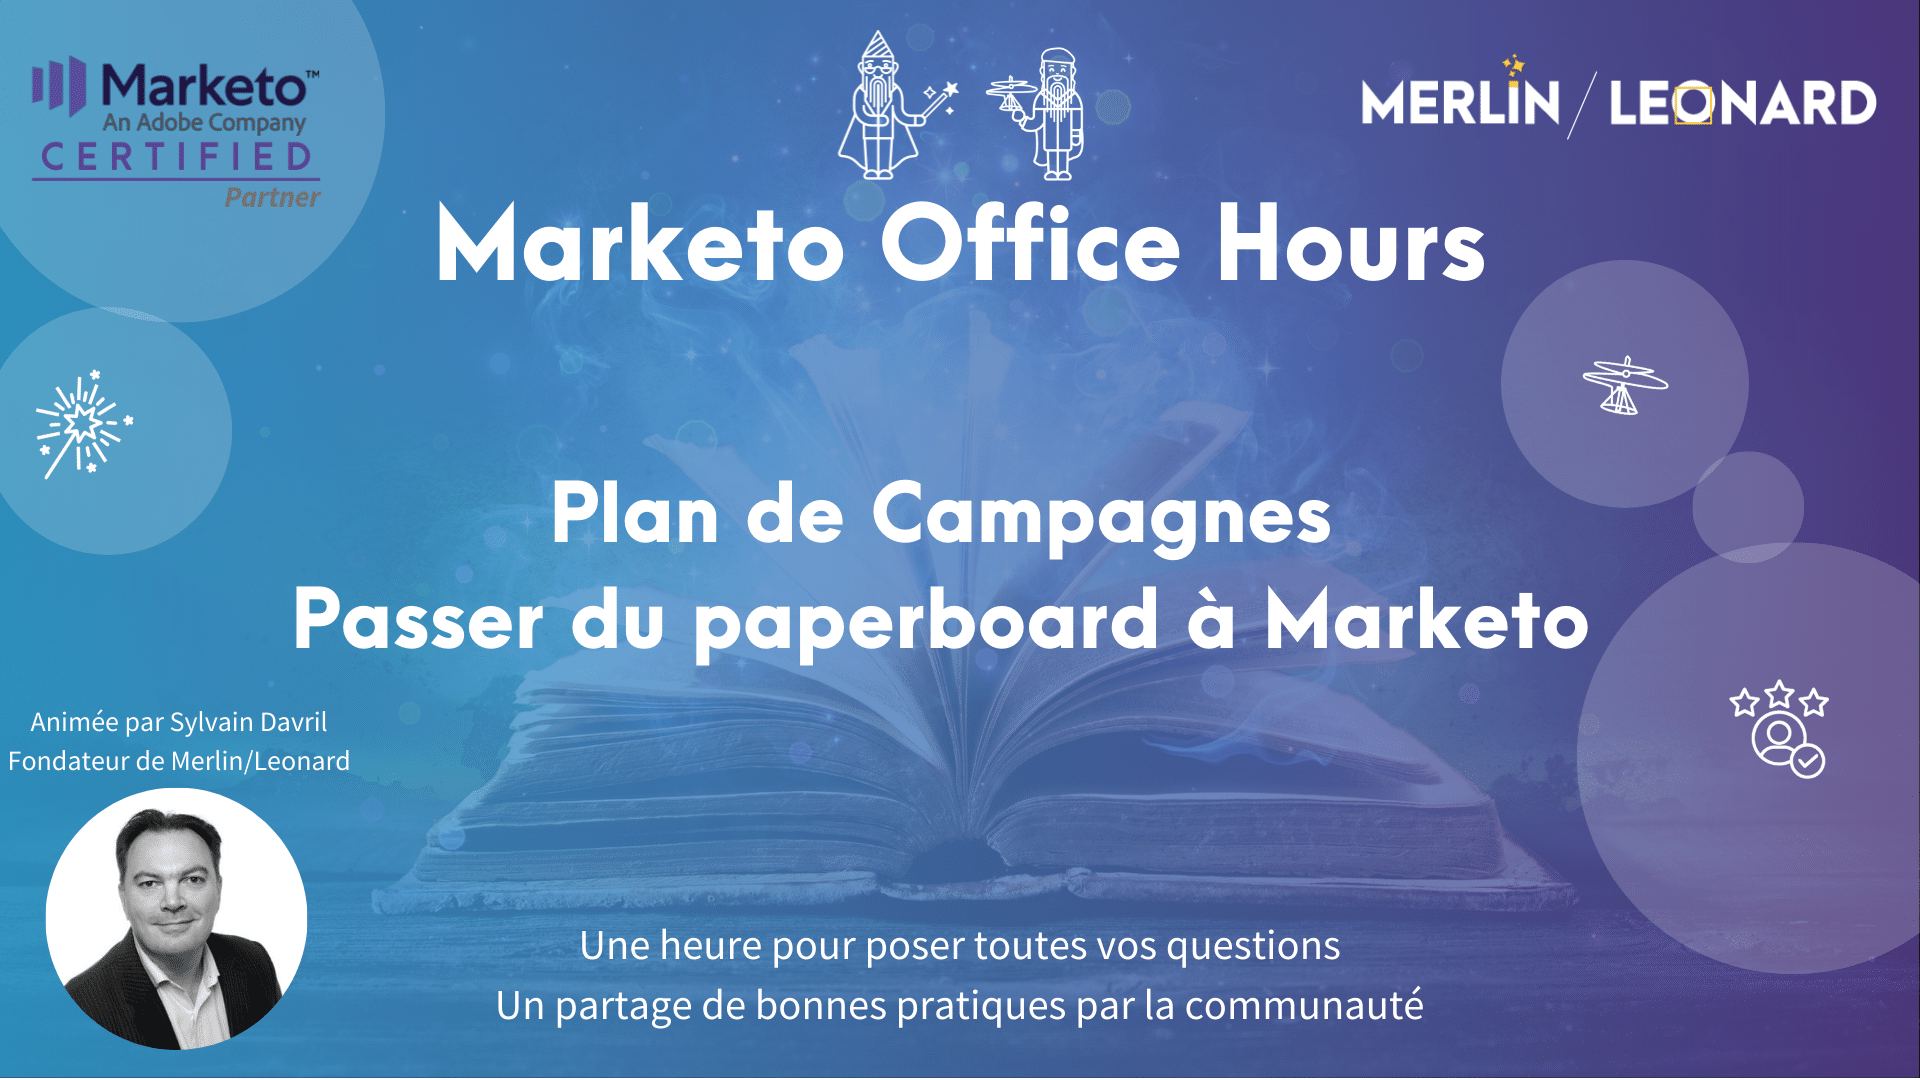 MerlinLeonard Marketo Office Hours 2021 06 18 - Switching from Paperboard to Marketo